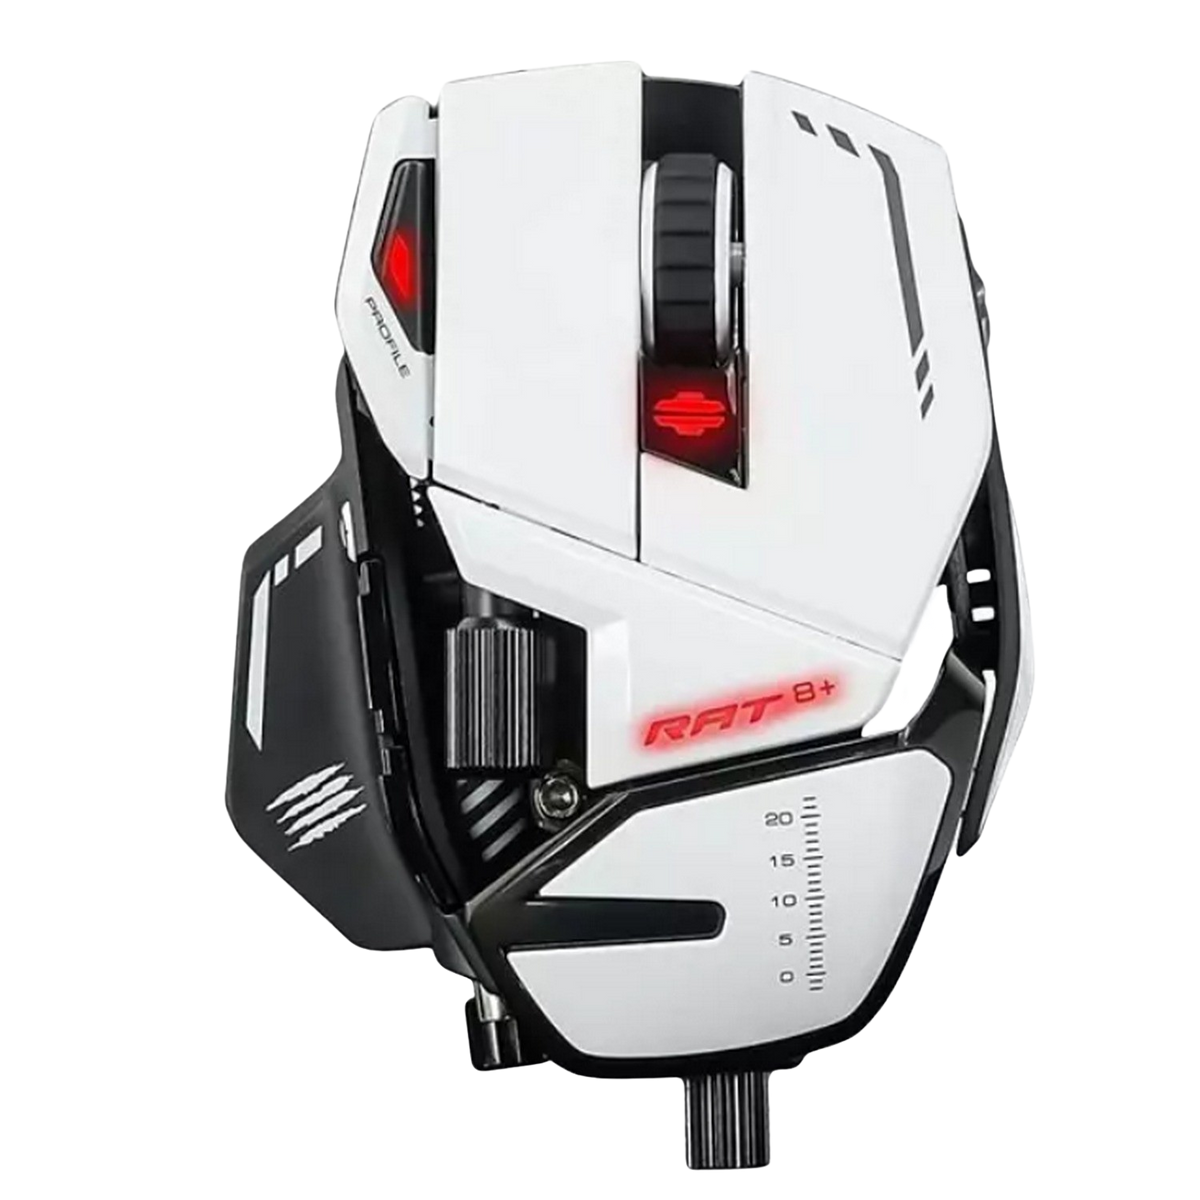 MAD CATZ MR05DCINWH000-0 Maus, MOUSE, OPTICAL Weiß R.A.T. WH 8+ GAMING Gaming